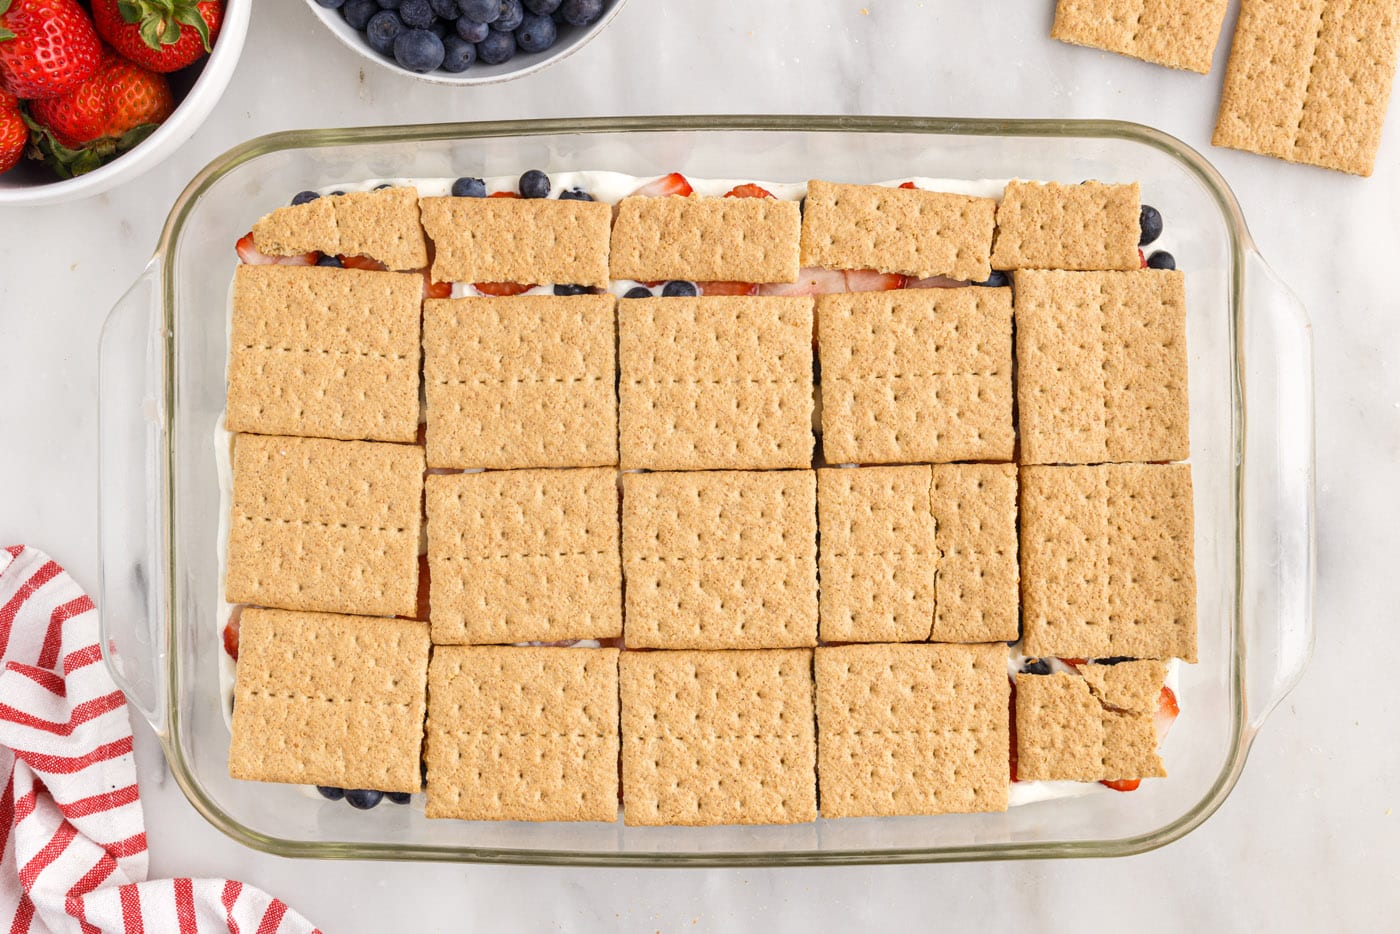 graham crackers layered over berries in a baking dish